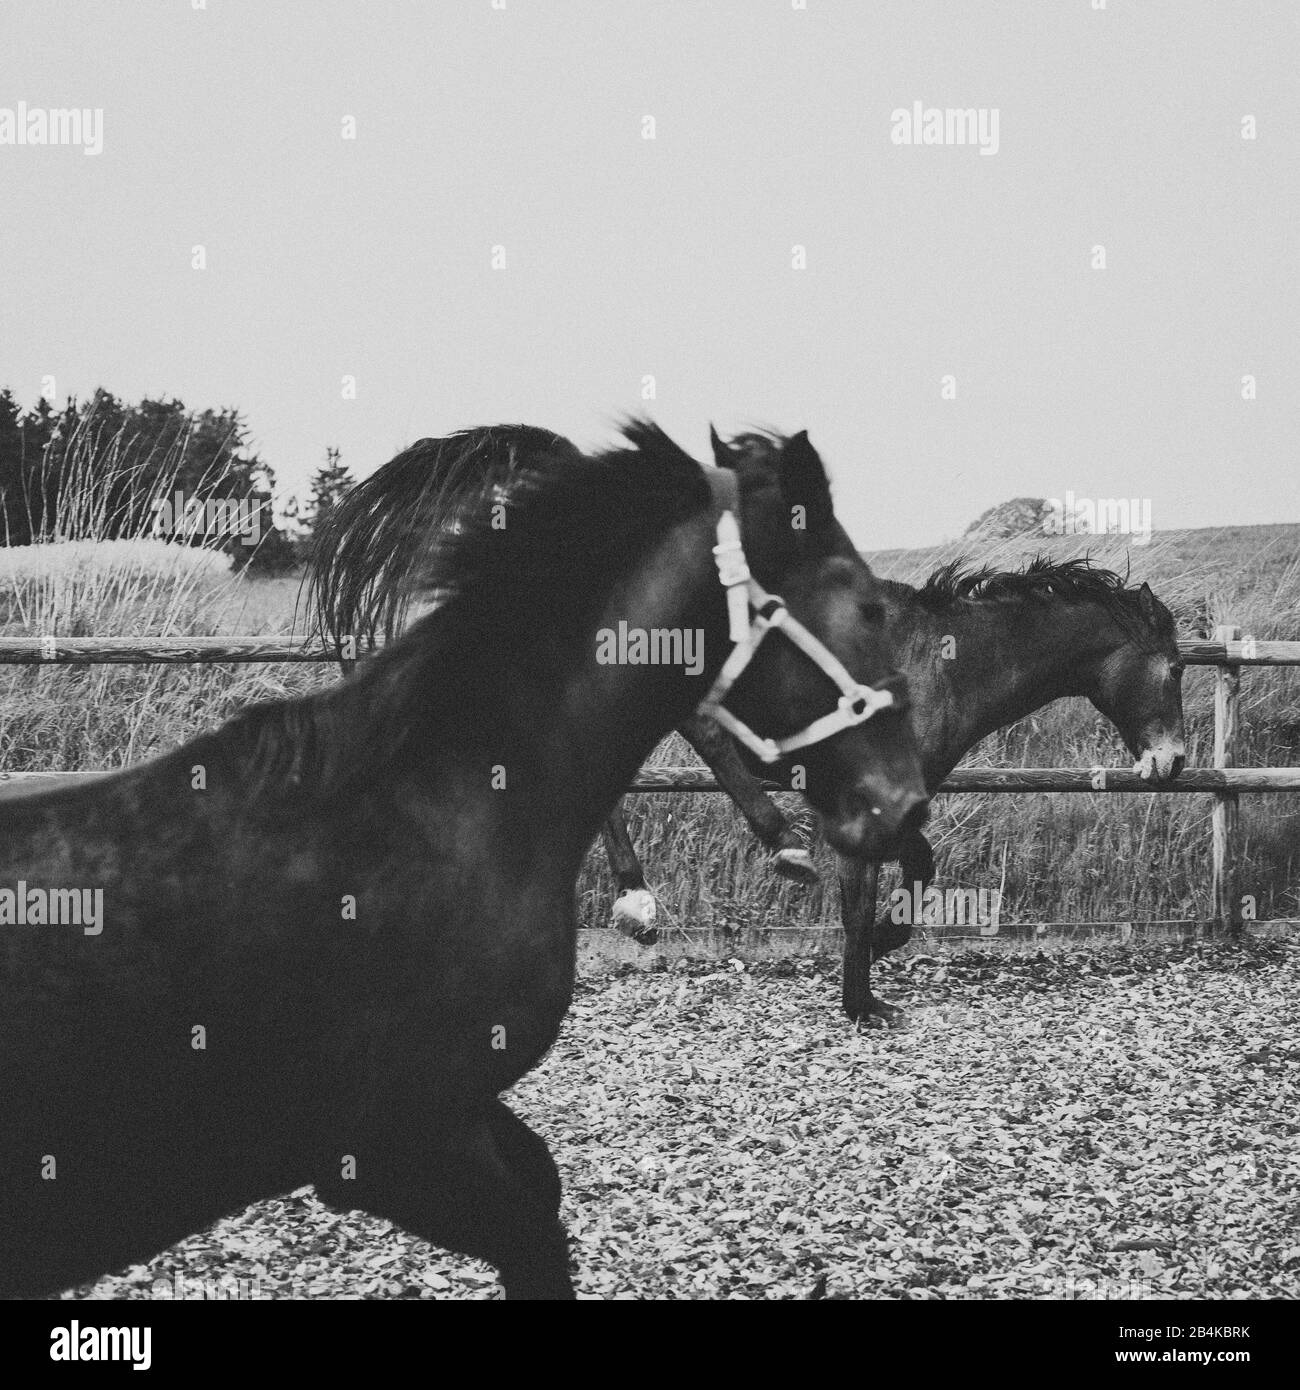 Horses in the paddock, black and white Stock Photo